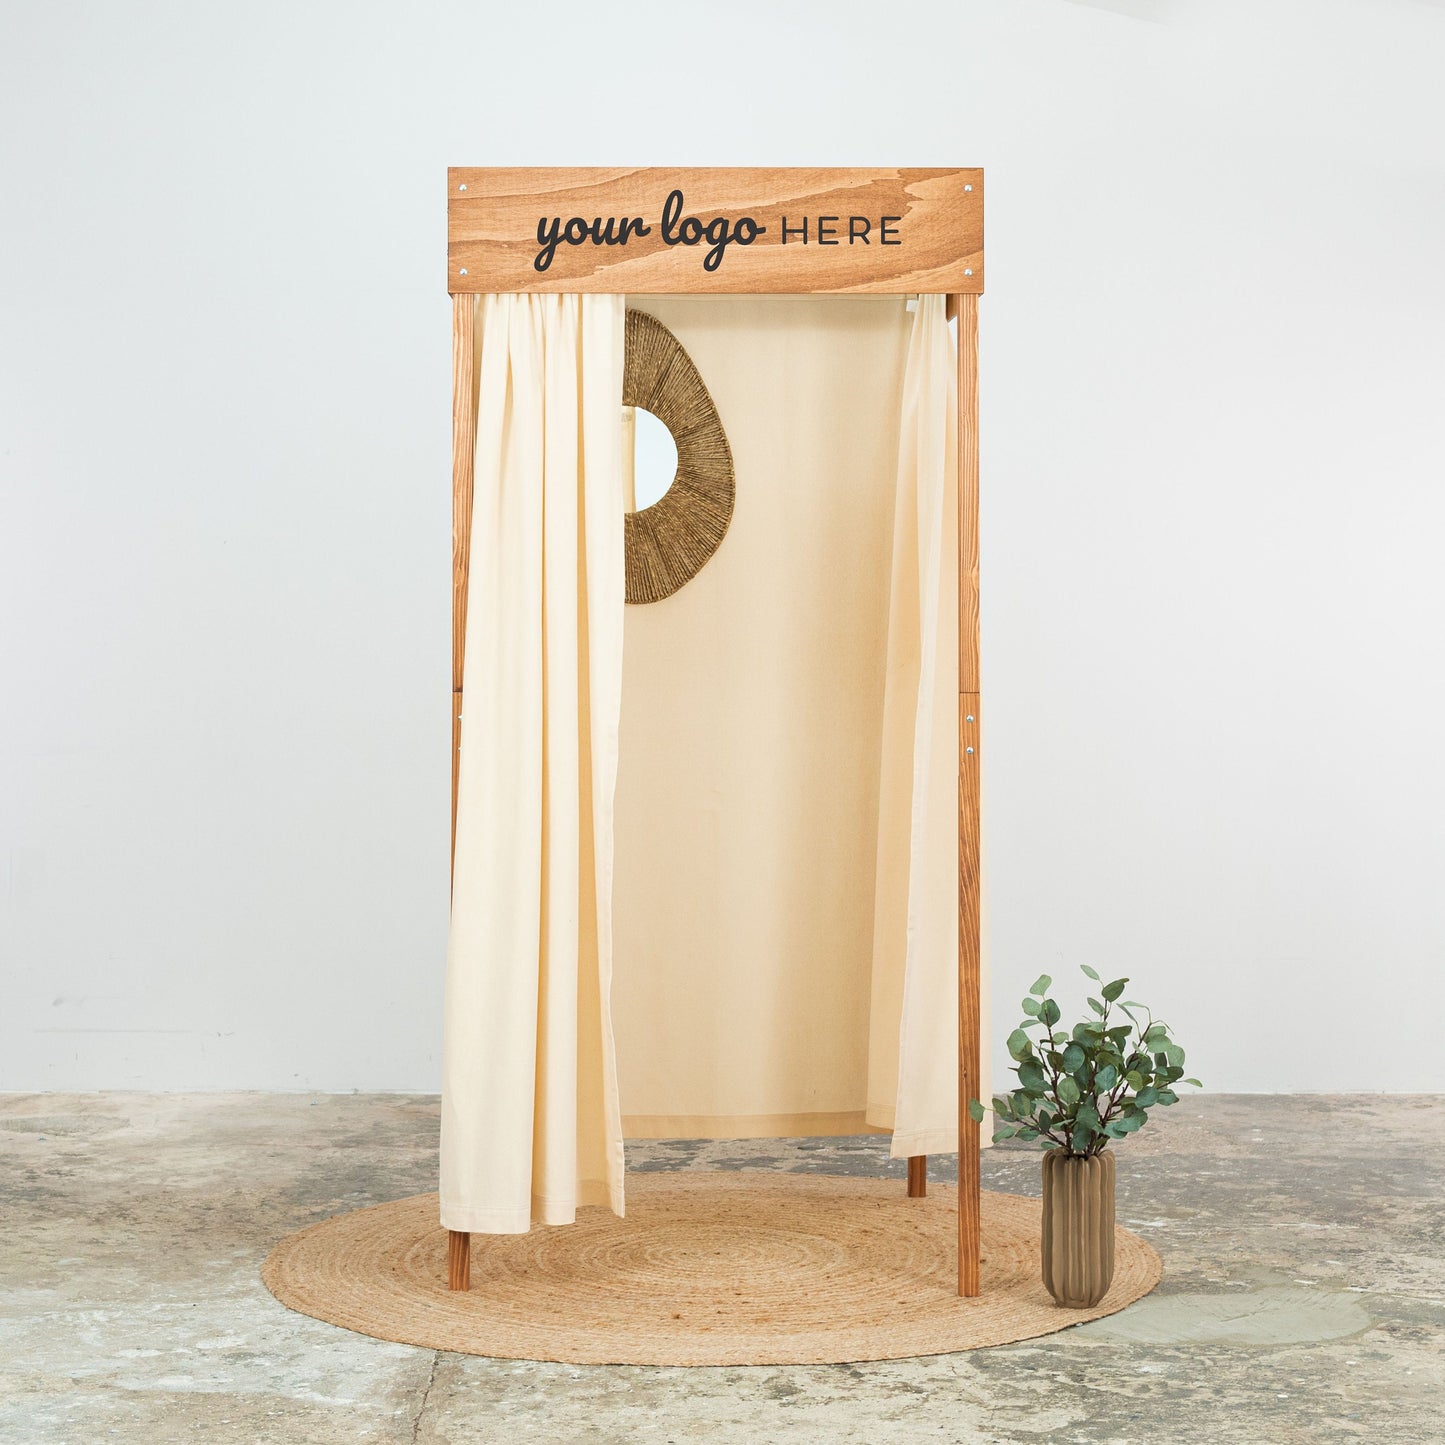 Collapsible Wooden Fitting Room VH-03-CF for trade shows, showrooms, fashion fair and events | Milimetry